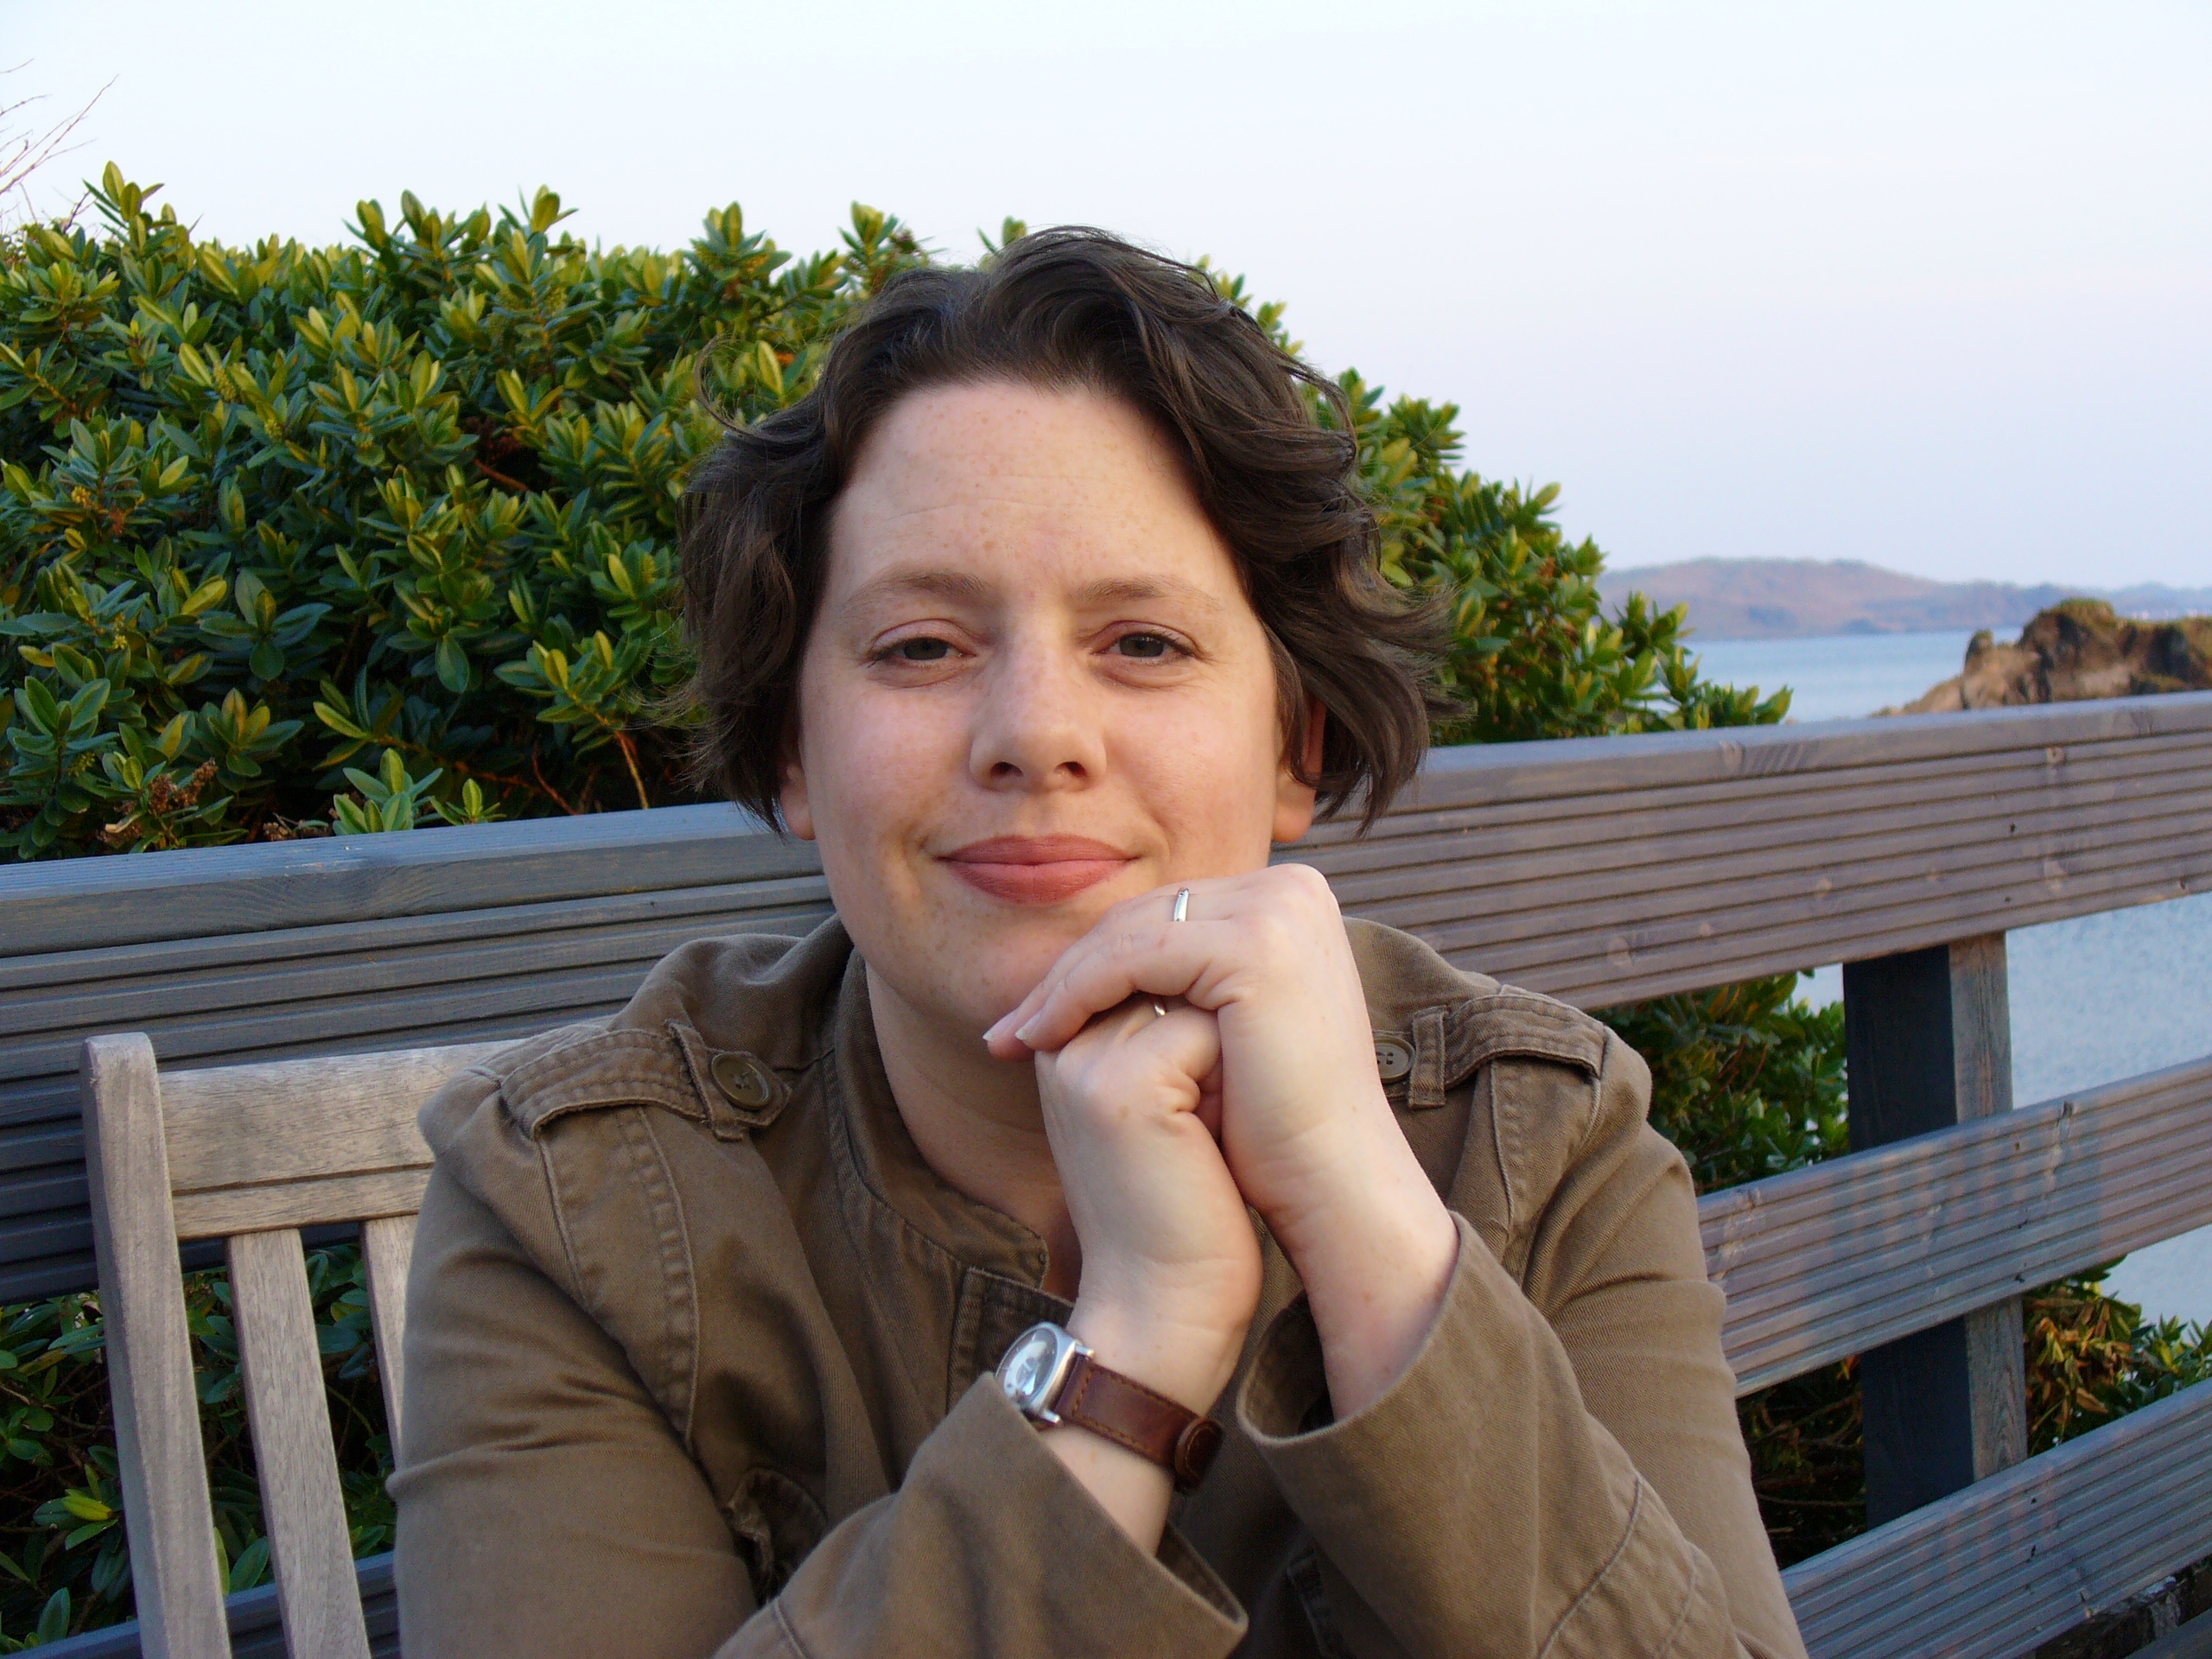 A woman with dark hair and a khaki jacket sitting on a bench with a hedge and the sea behind her.